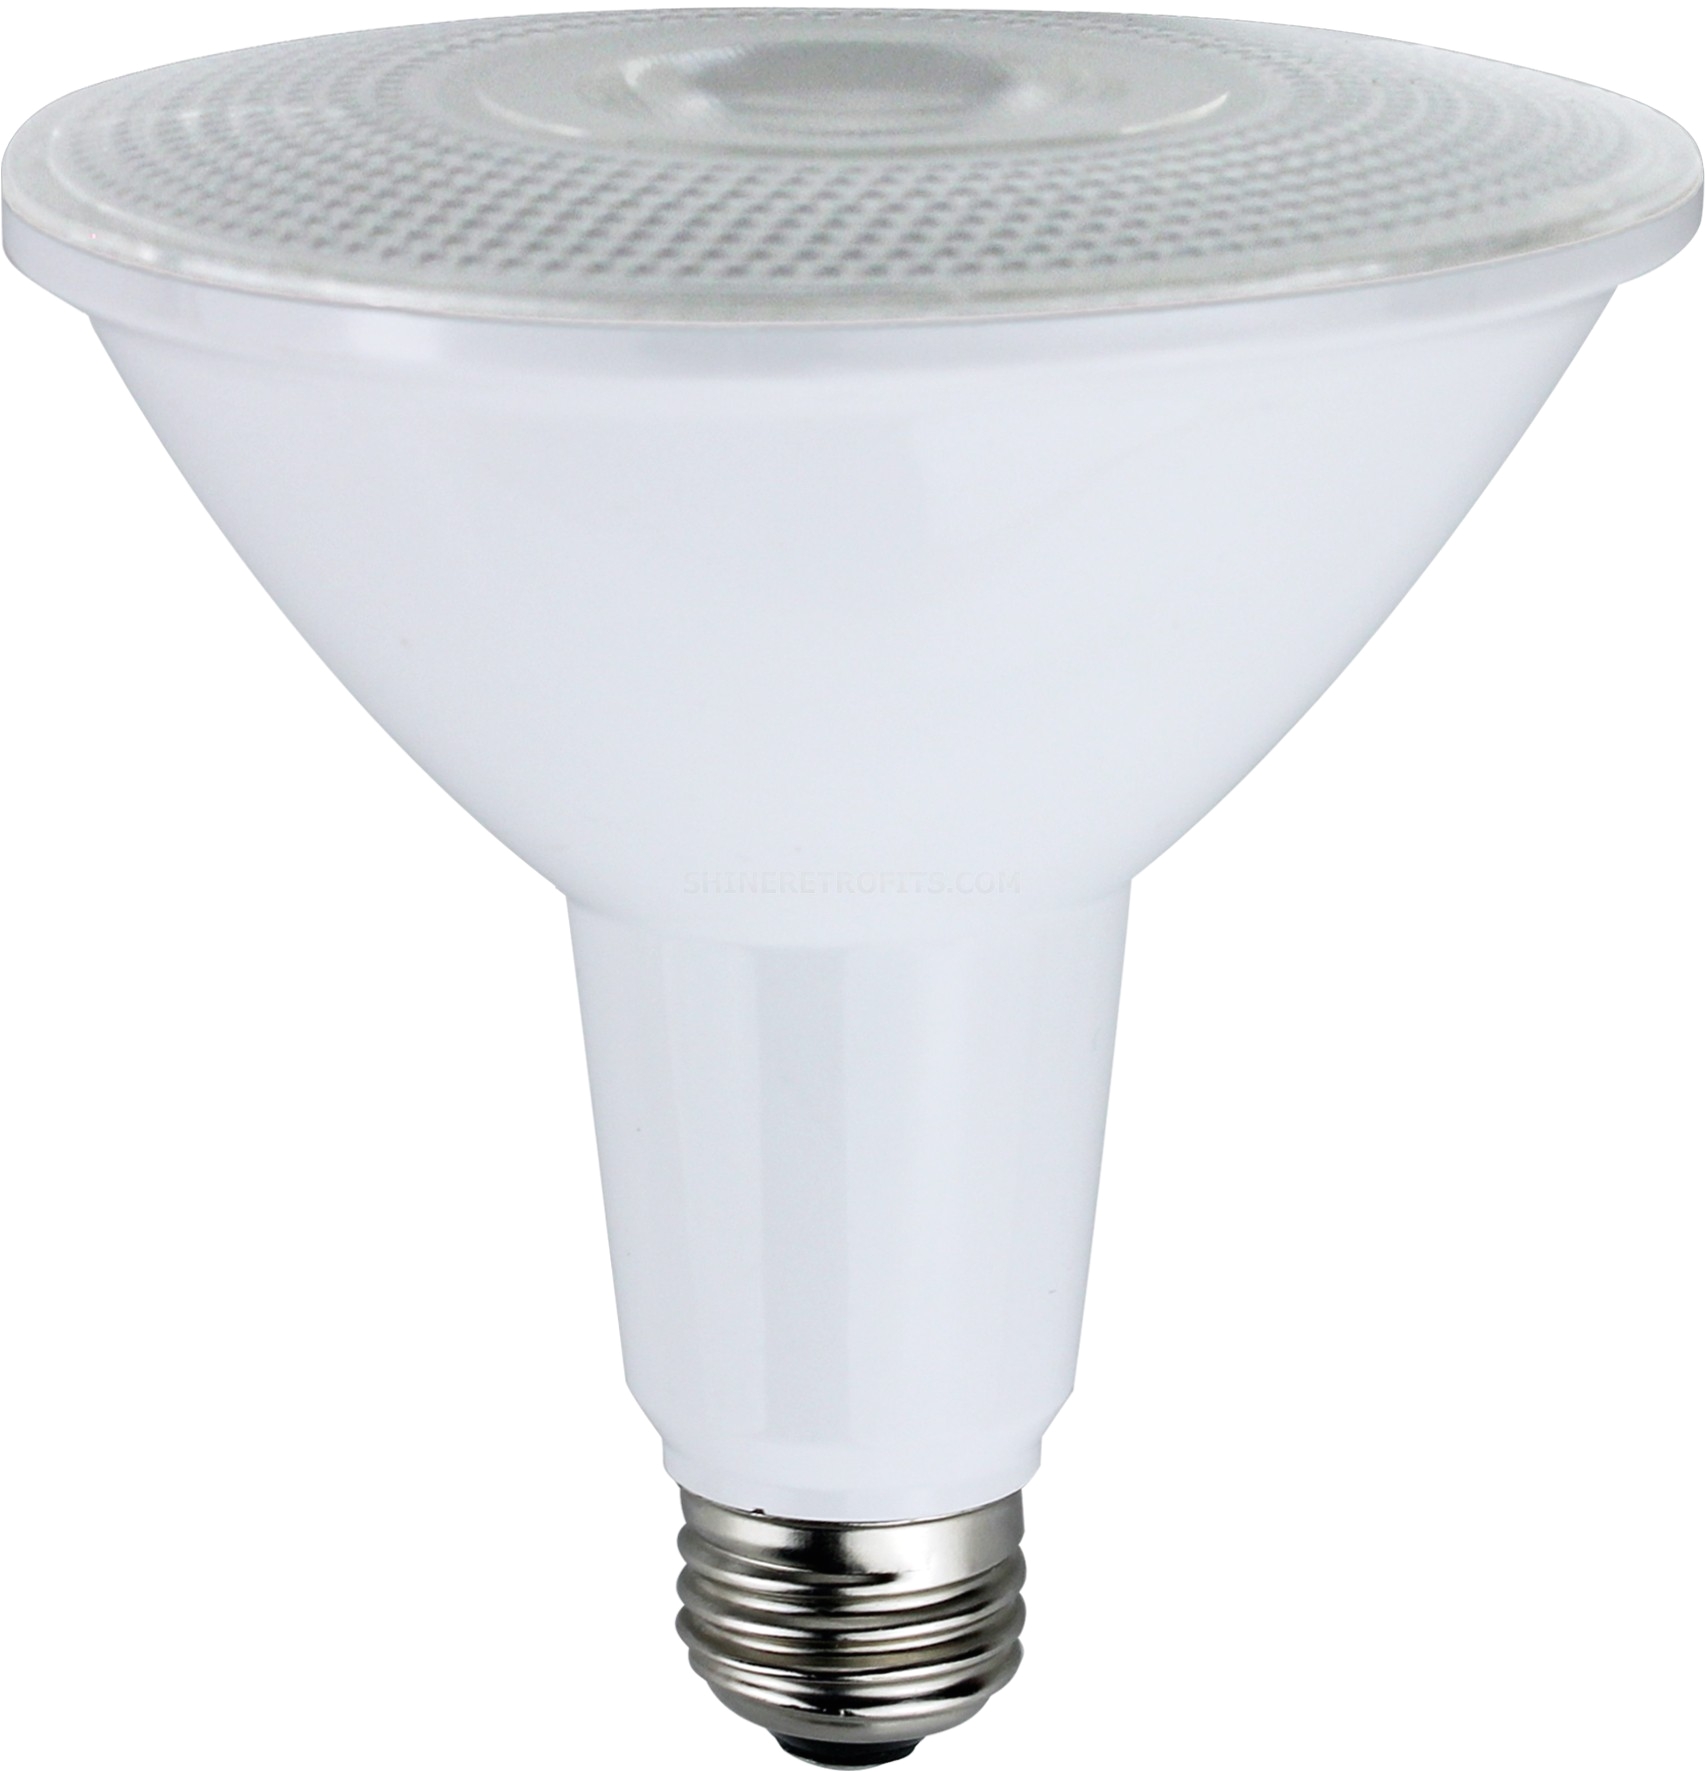 naturaled led15par38 od 120l fl energy star certified 15 watt par38 led dimmable outdoor rated lamp 100w equivalent